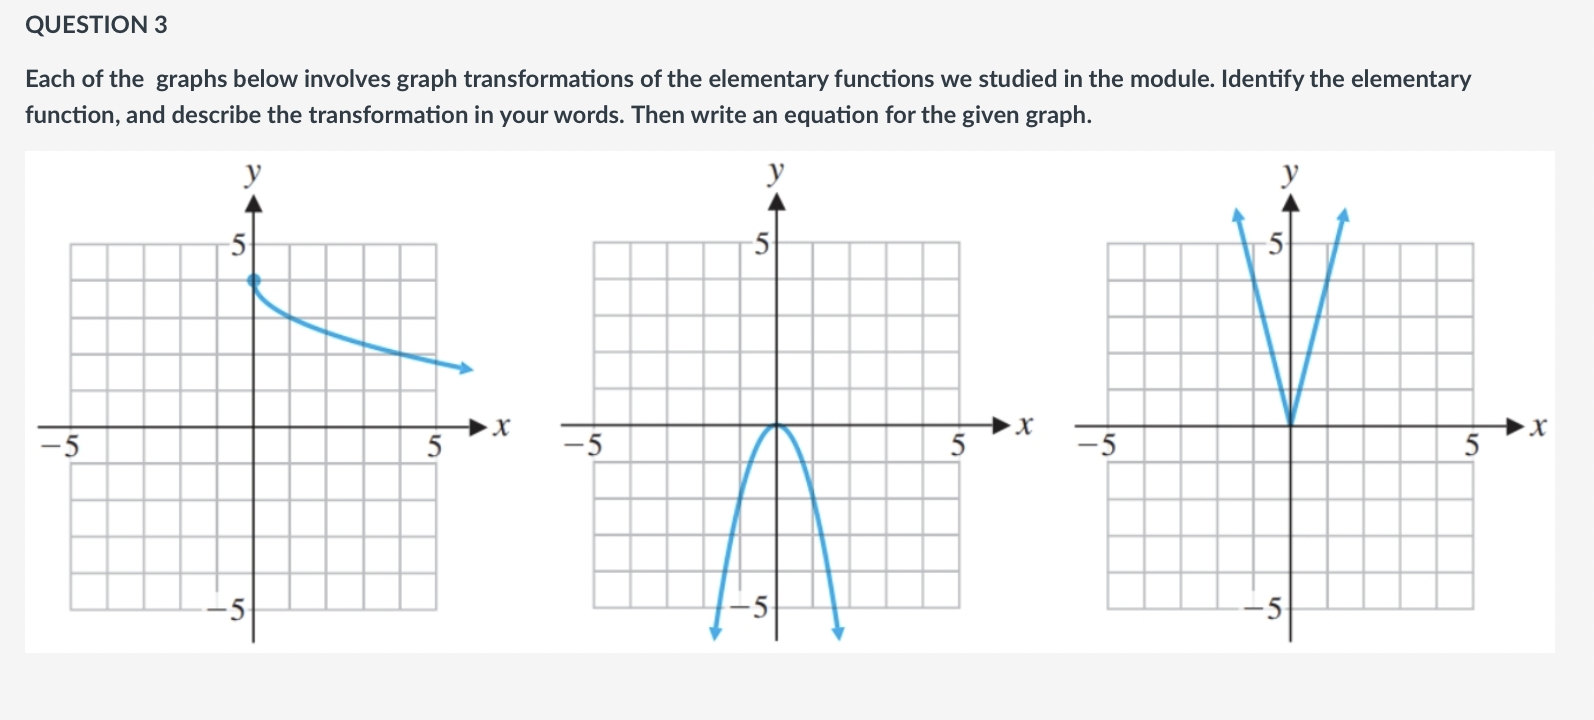 Transformation of Functions and Graphs